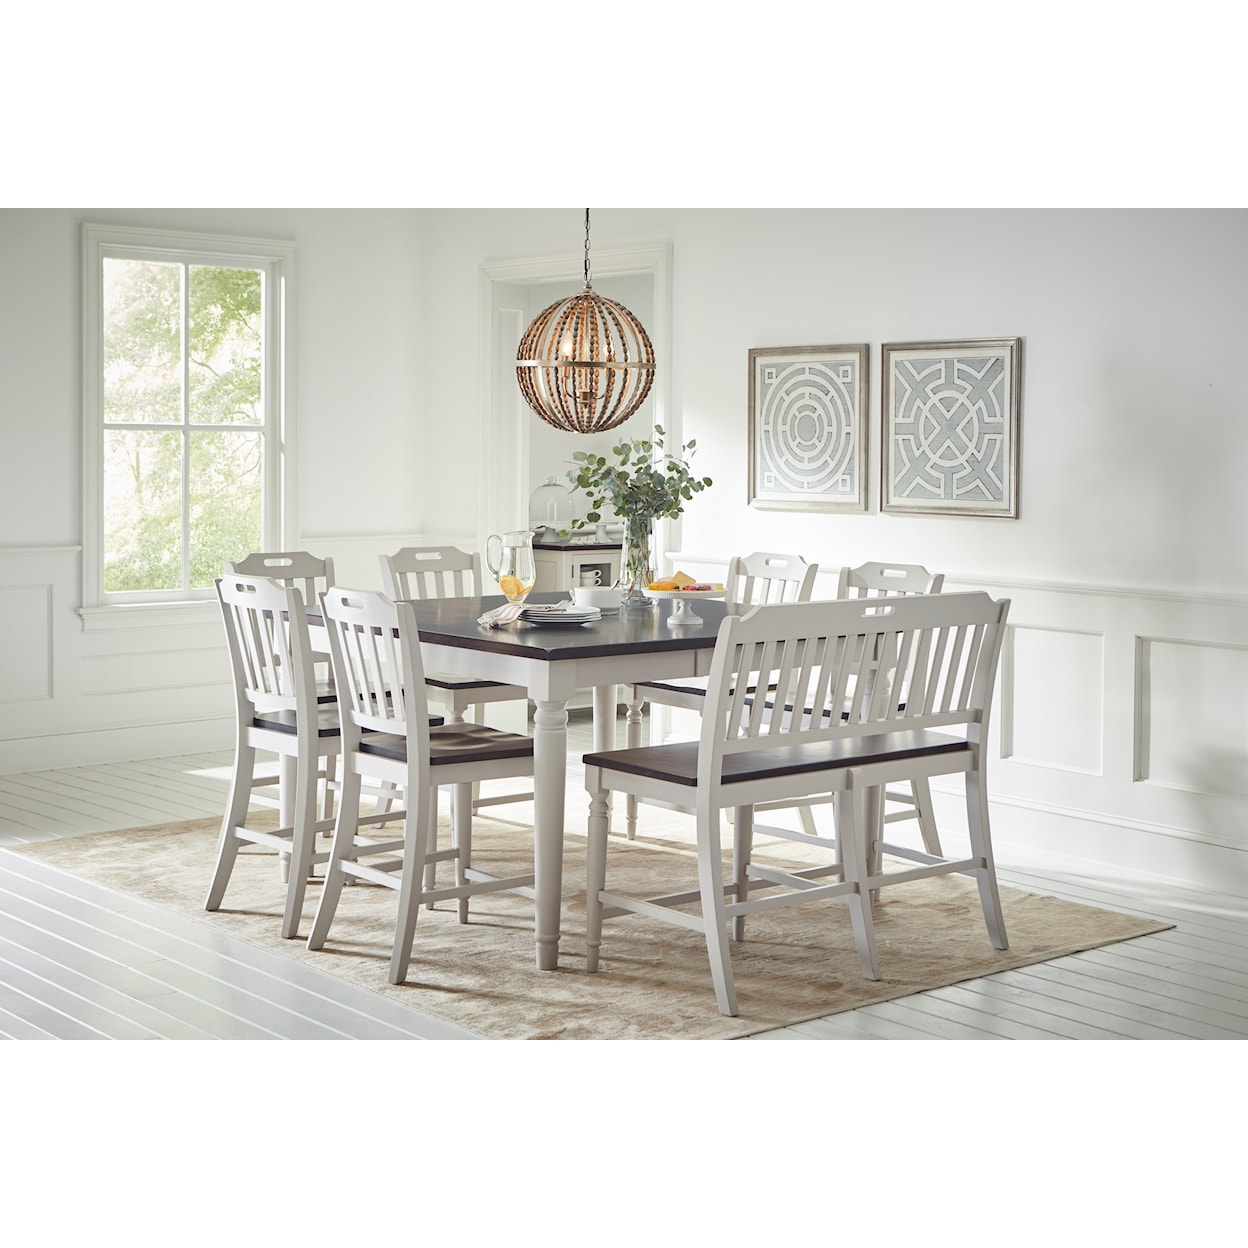 Jofran Orchard Park 7pc Dining Room Group